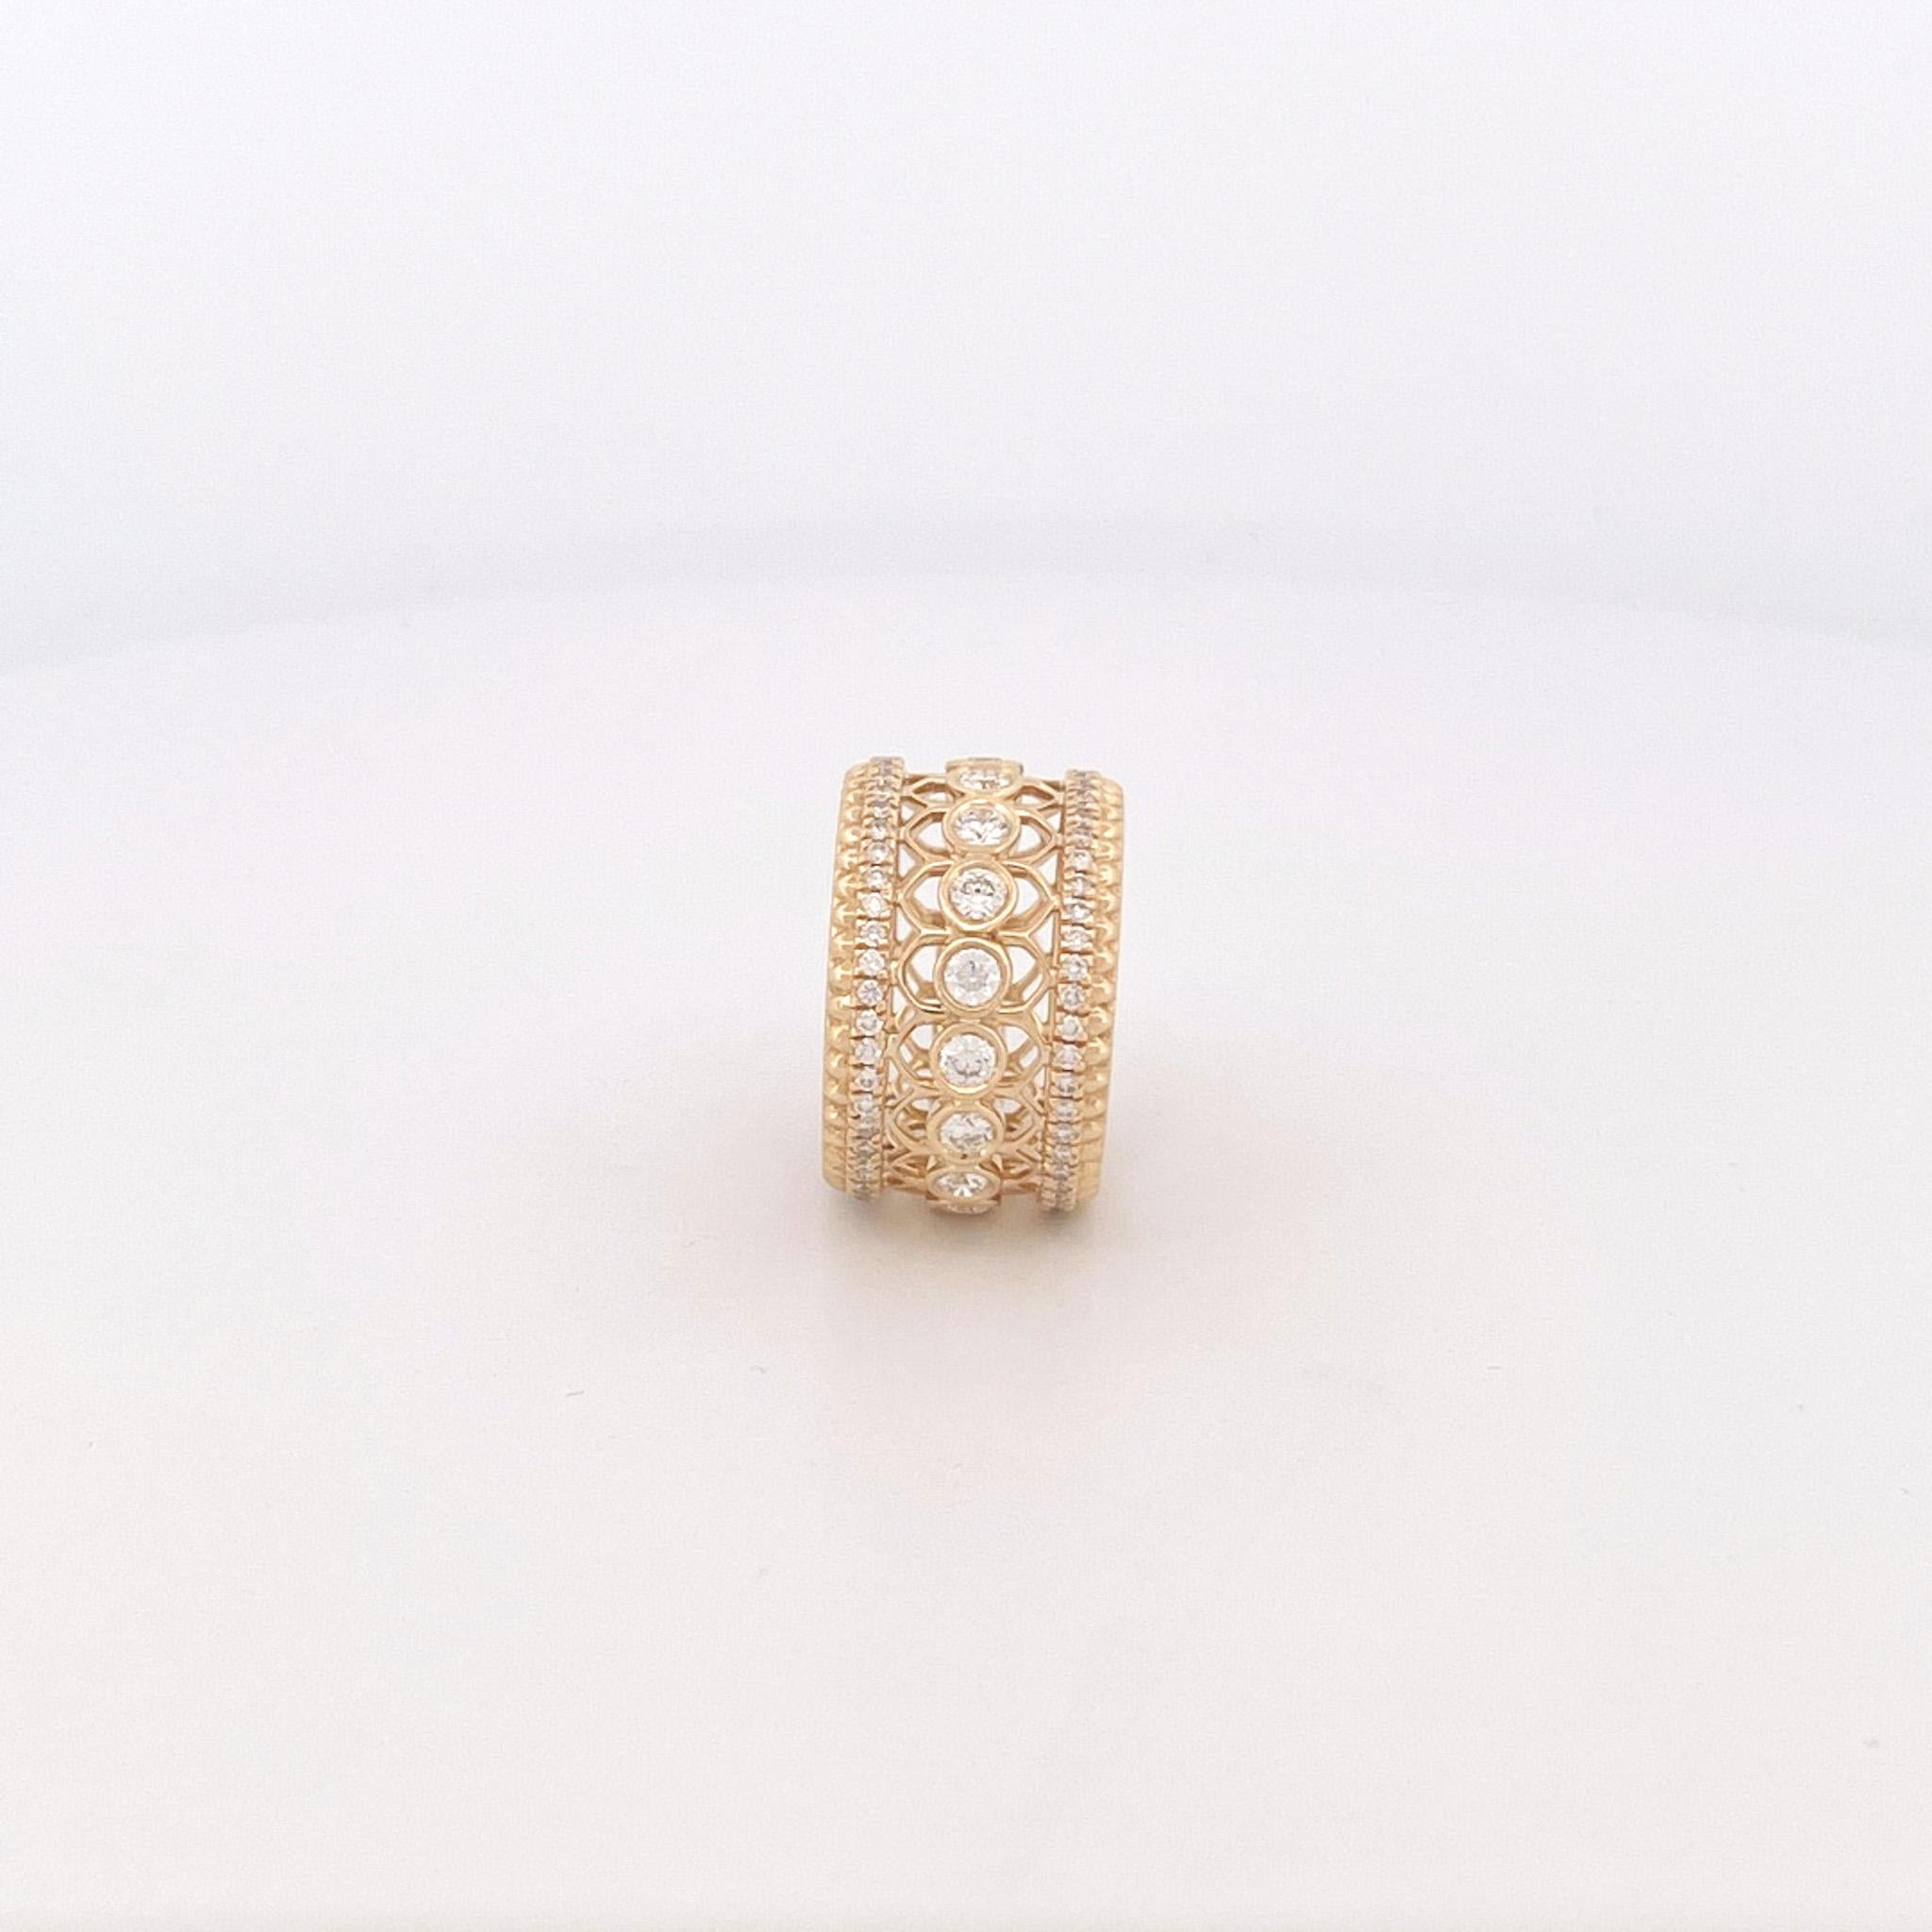 From designer Roberto Coin’s Cento Rosette Collection, 18 karat yellow gold wide diamond band. This band is crafted with round brilliant cut and round cut diamonds with a total combined weight of 1.80 carats. These diamonds have G color and VS